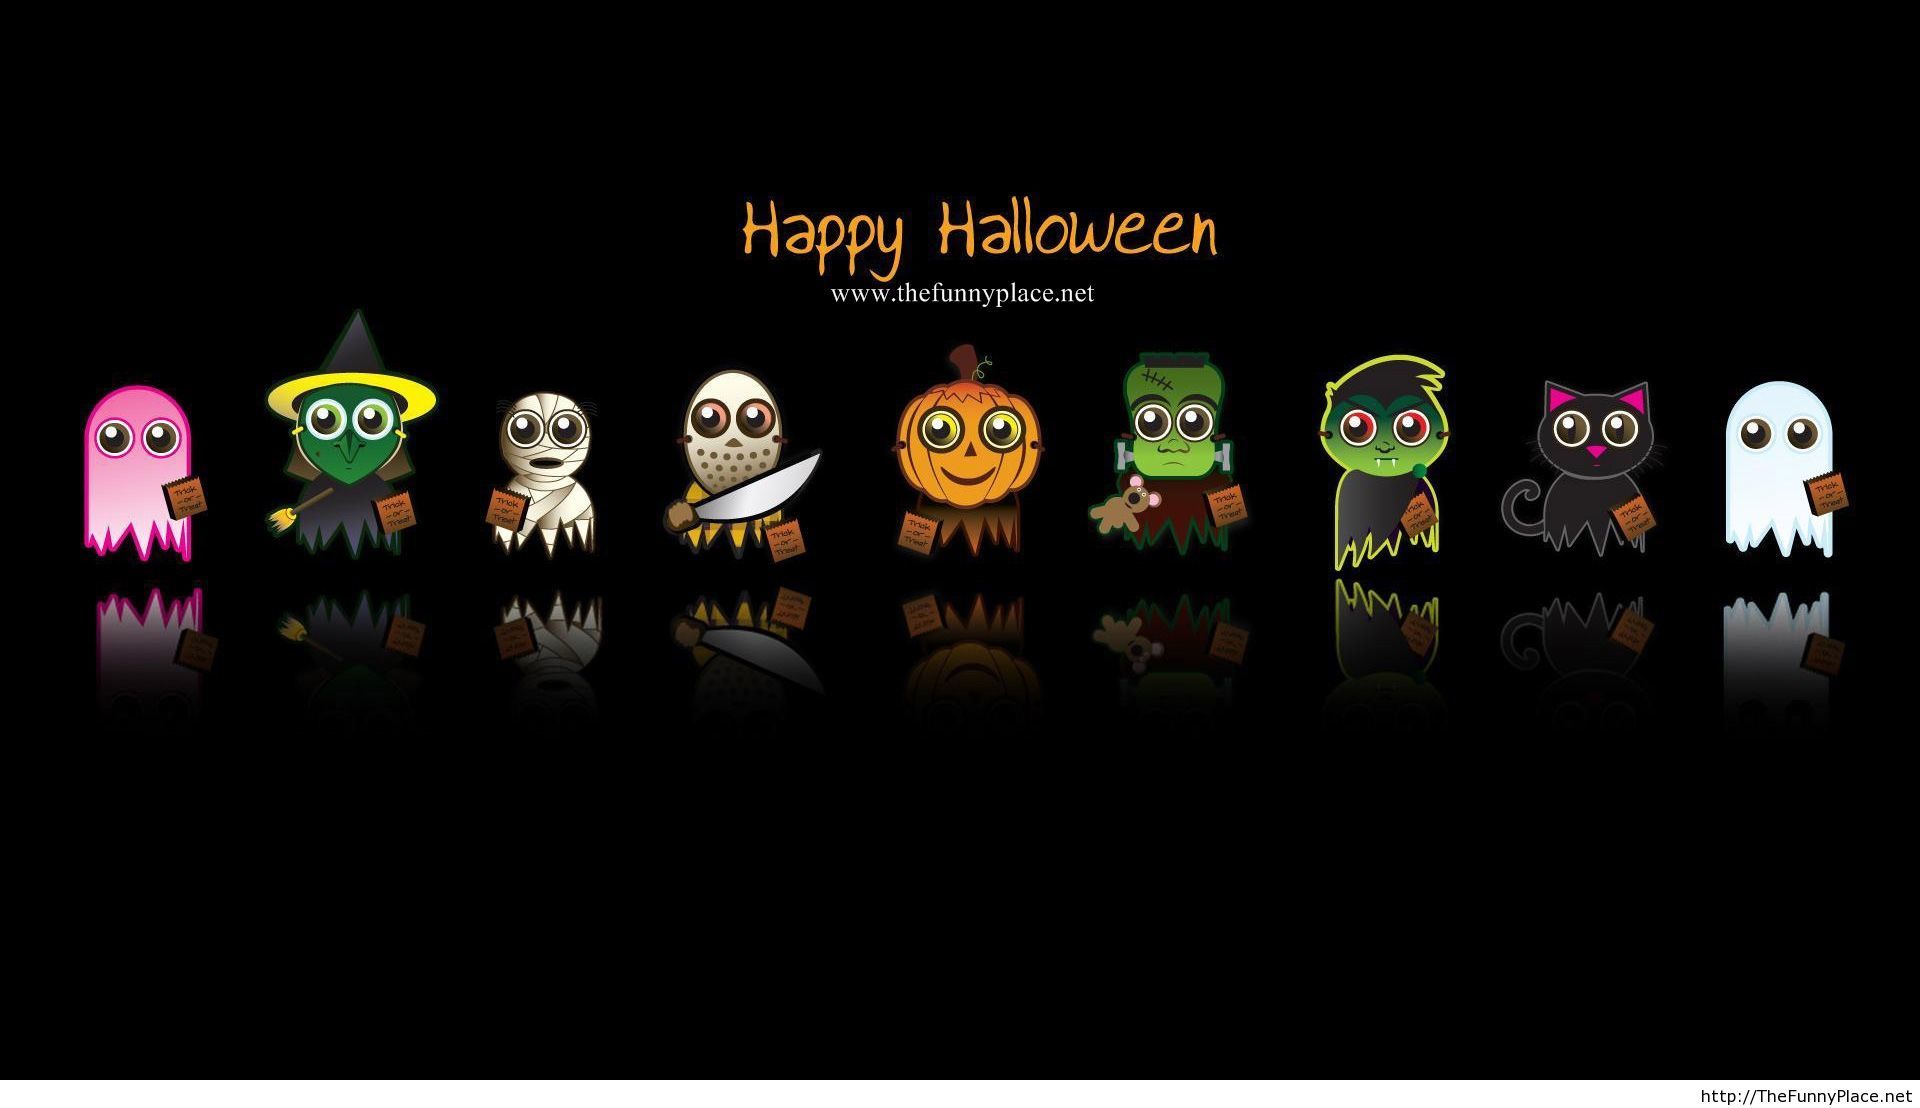 Happy Halloween HD Wallpaper Funny Thefunnyplace